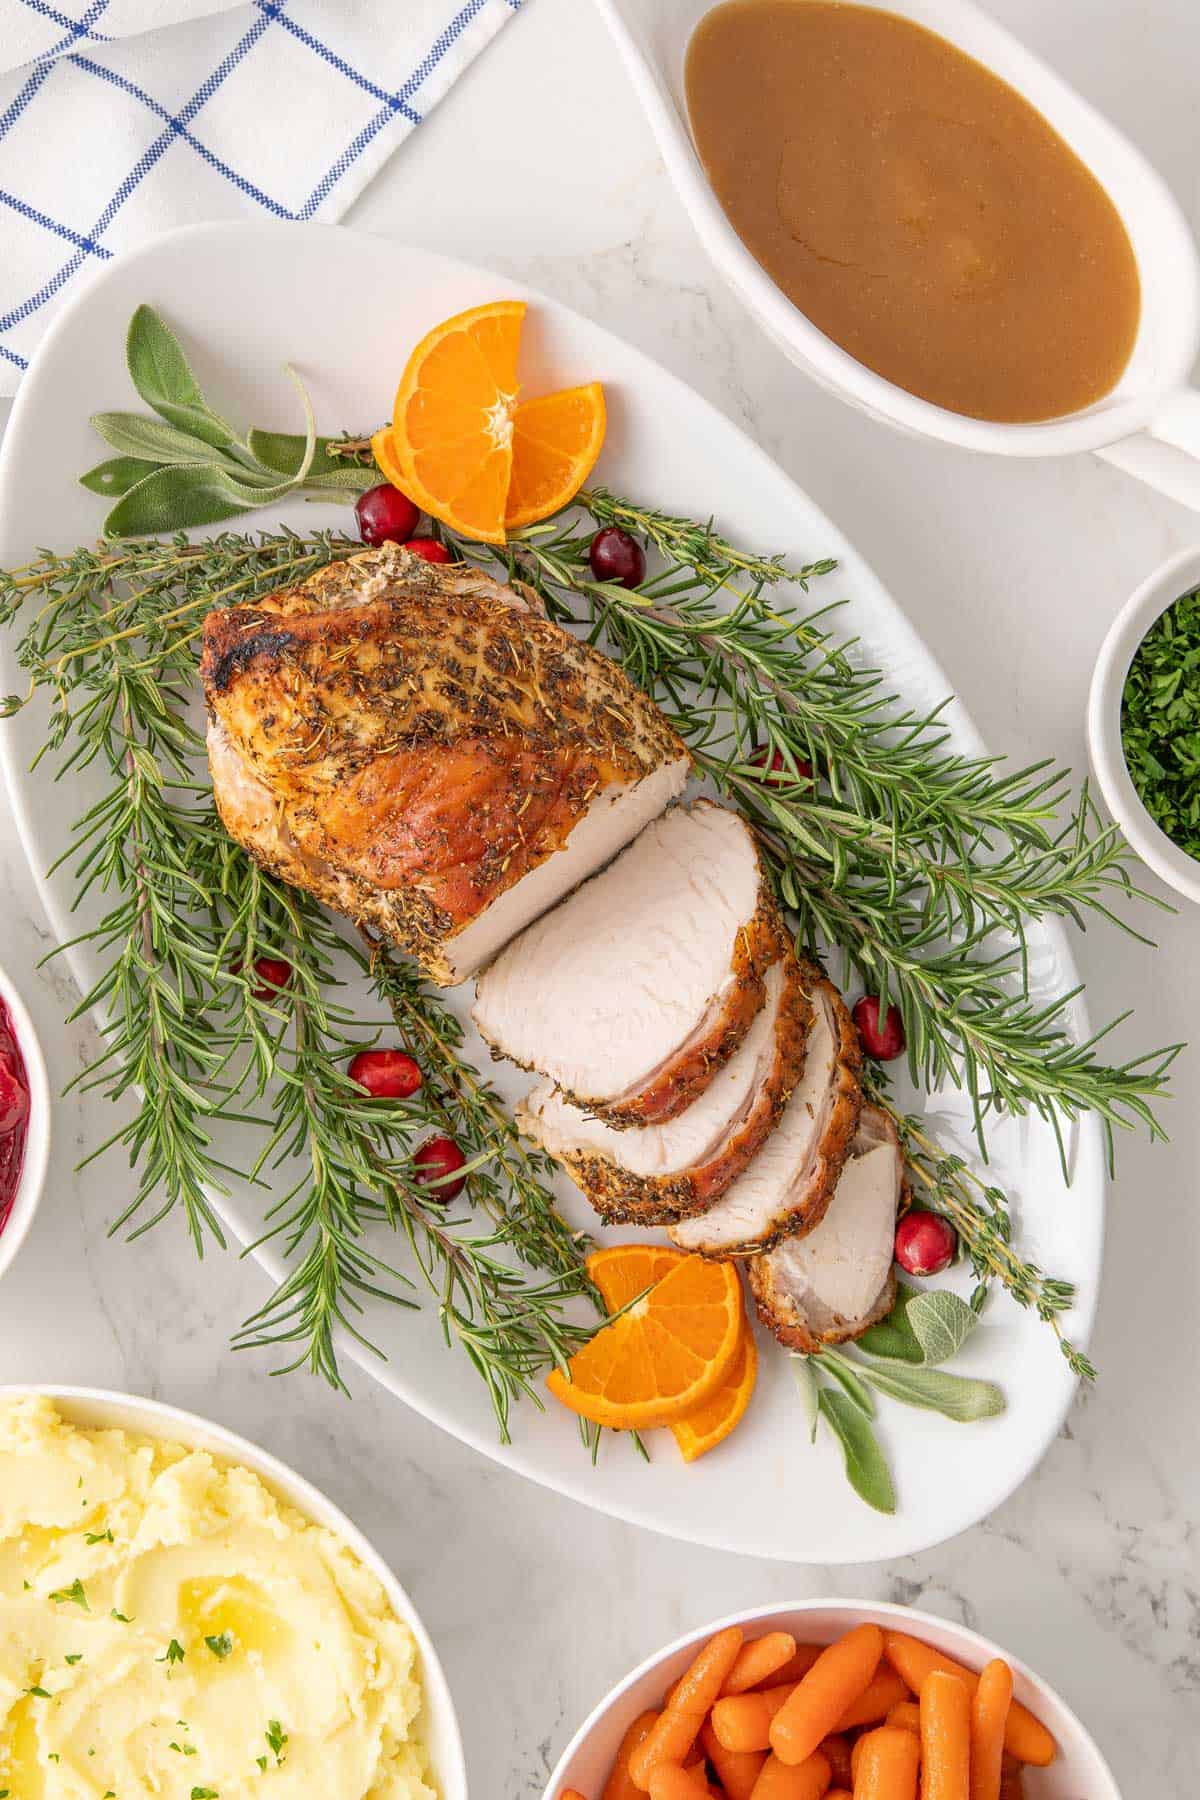 Overhead view of a partially sliced turkey breast on a platter beside bowls of side dishes and gravy.